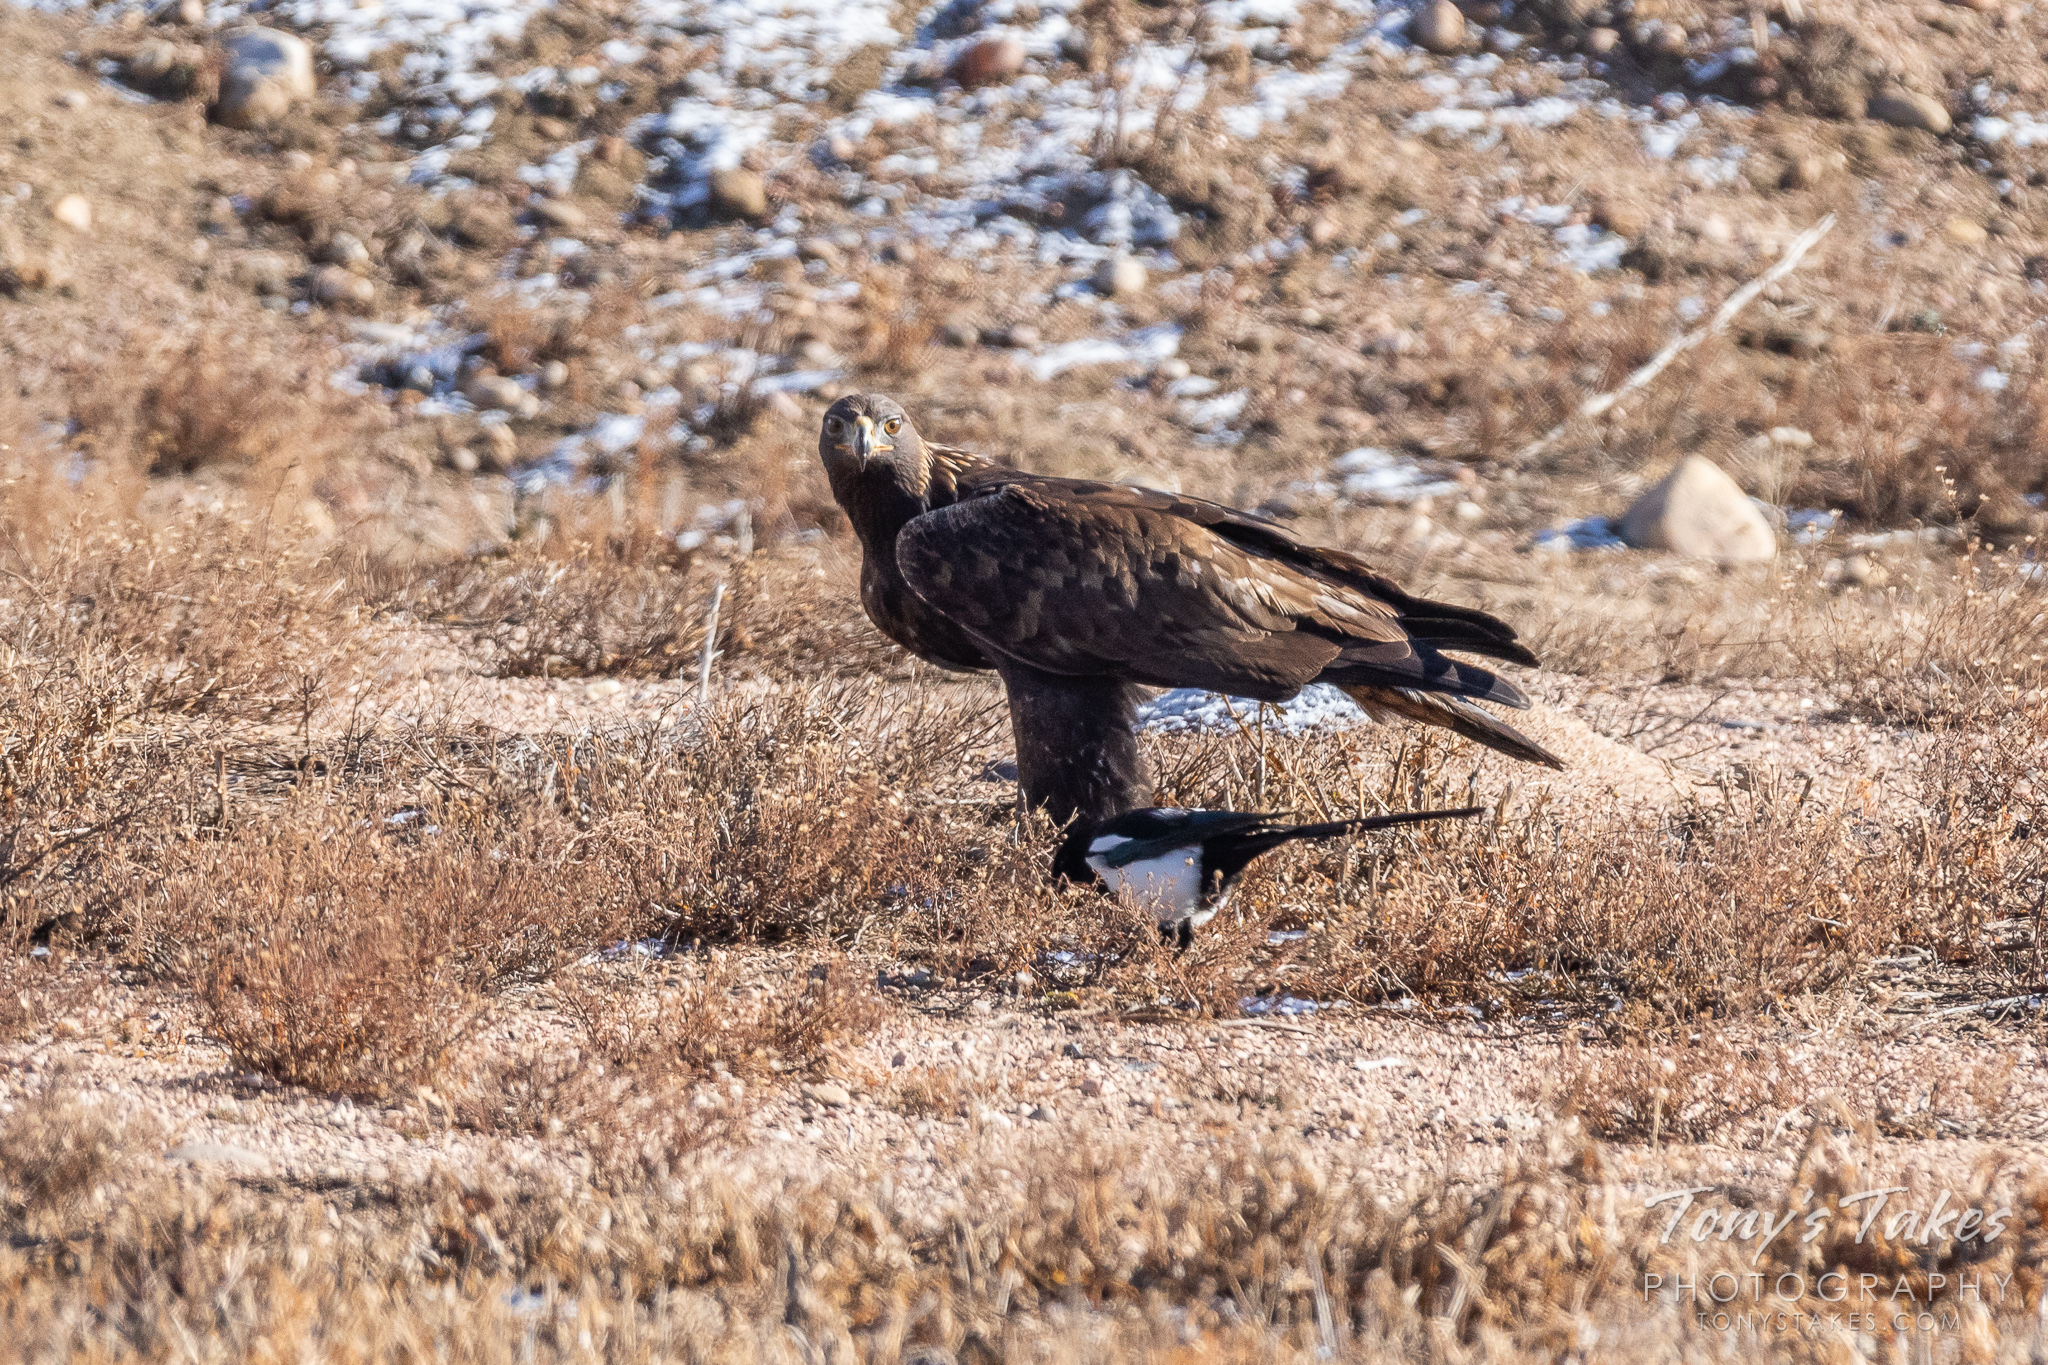 A Golden Eagle keeps watch on its meal while Magpies hope for leftovers. (© Tony’s Takes)